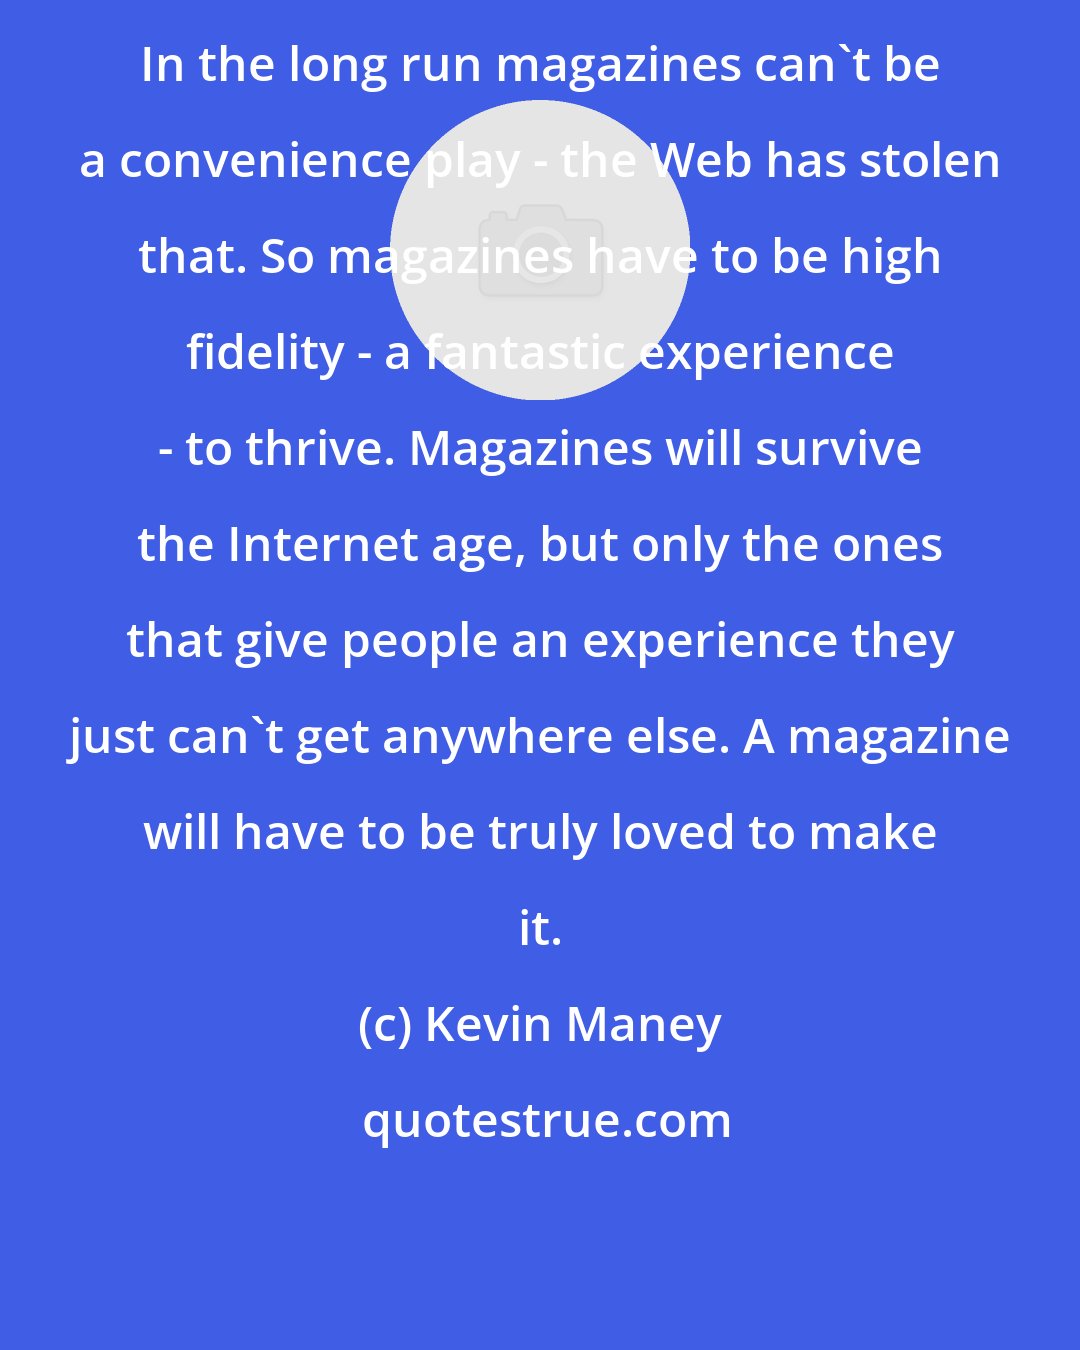 Kevin Maney: In the long run magazines can't be a convenience play - the Web has stolen that. So magazines have to be high fidelity - a fantastic experience - to thrive. Magazines will survive the Internet age, but only the ones that give people an experience they just can't get anywhere else. A magazine will have to be truly loved to make it.